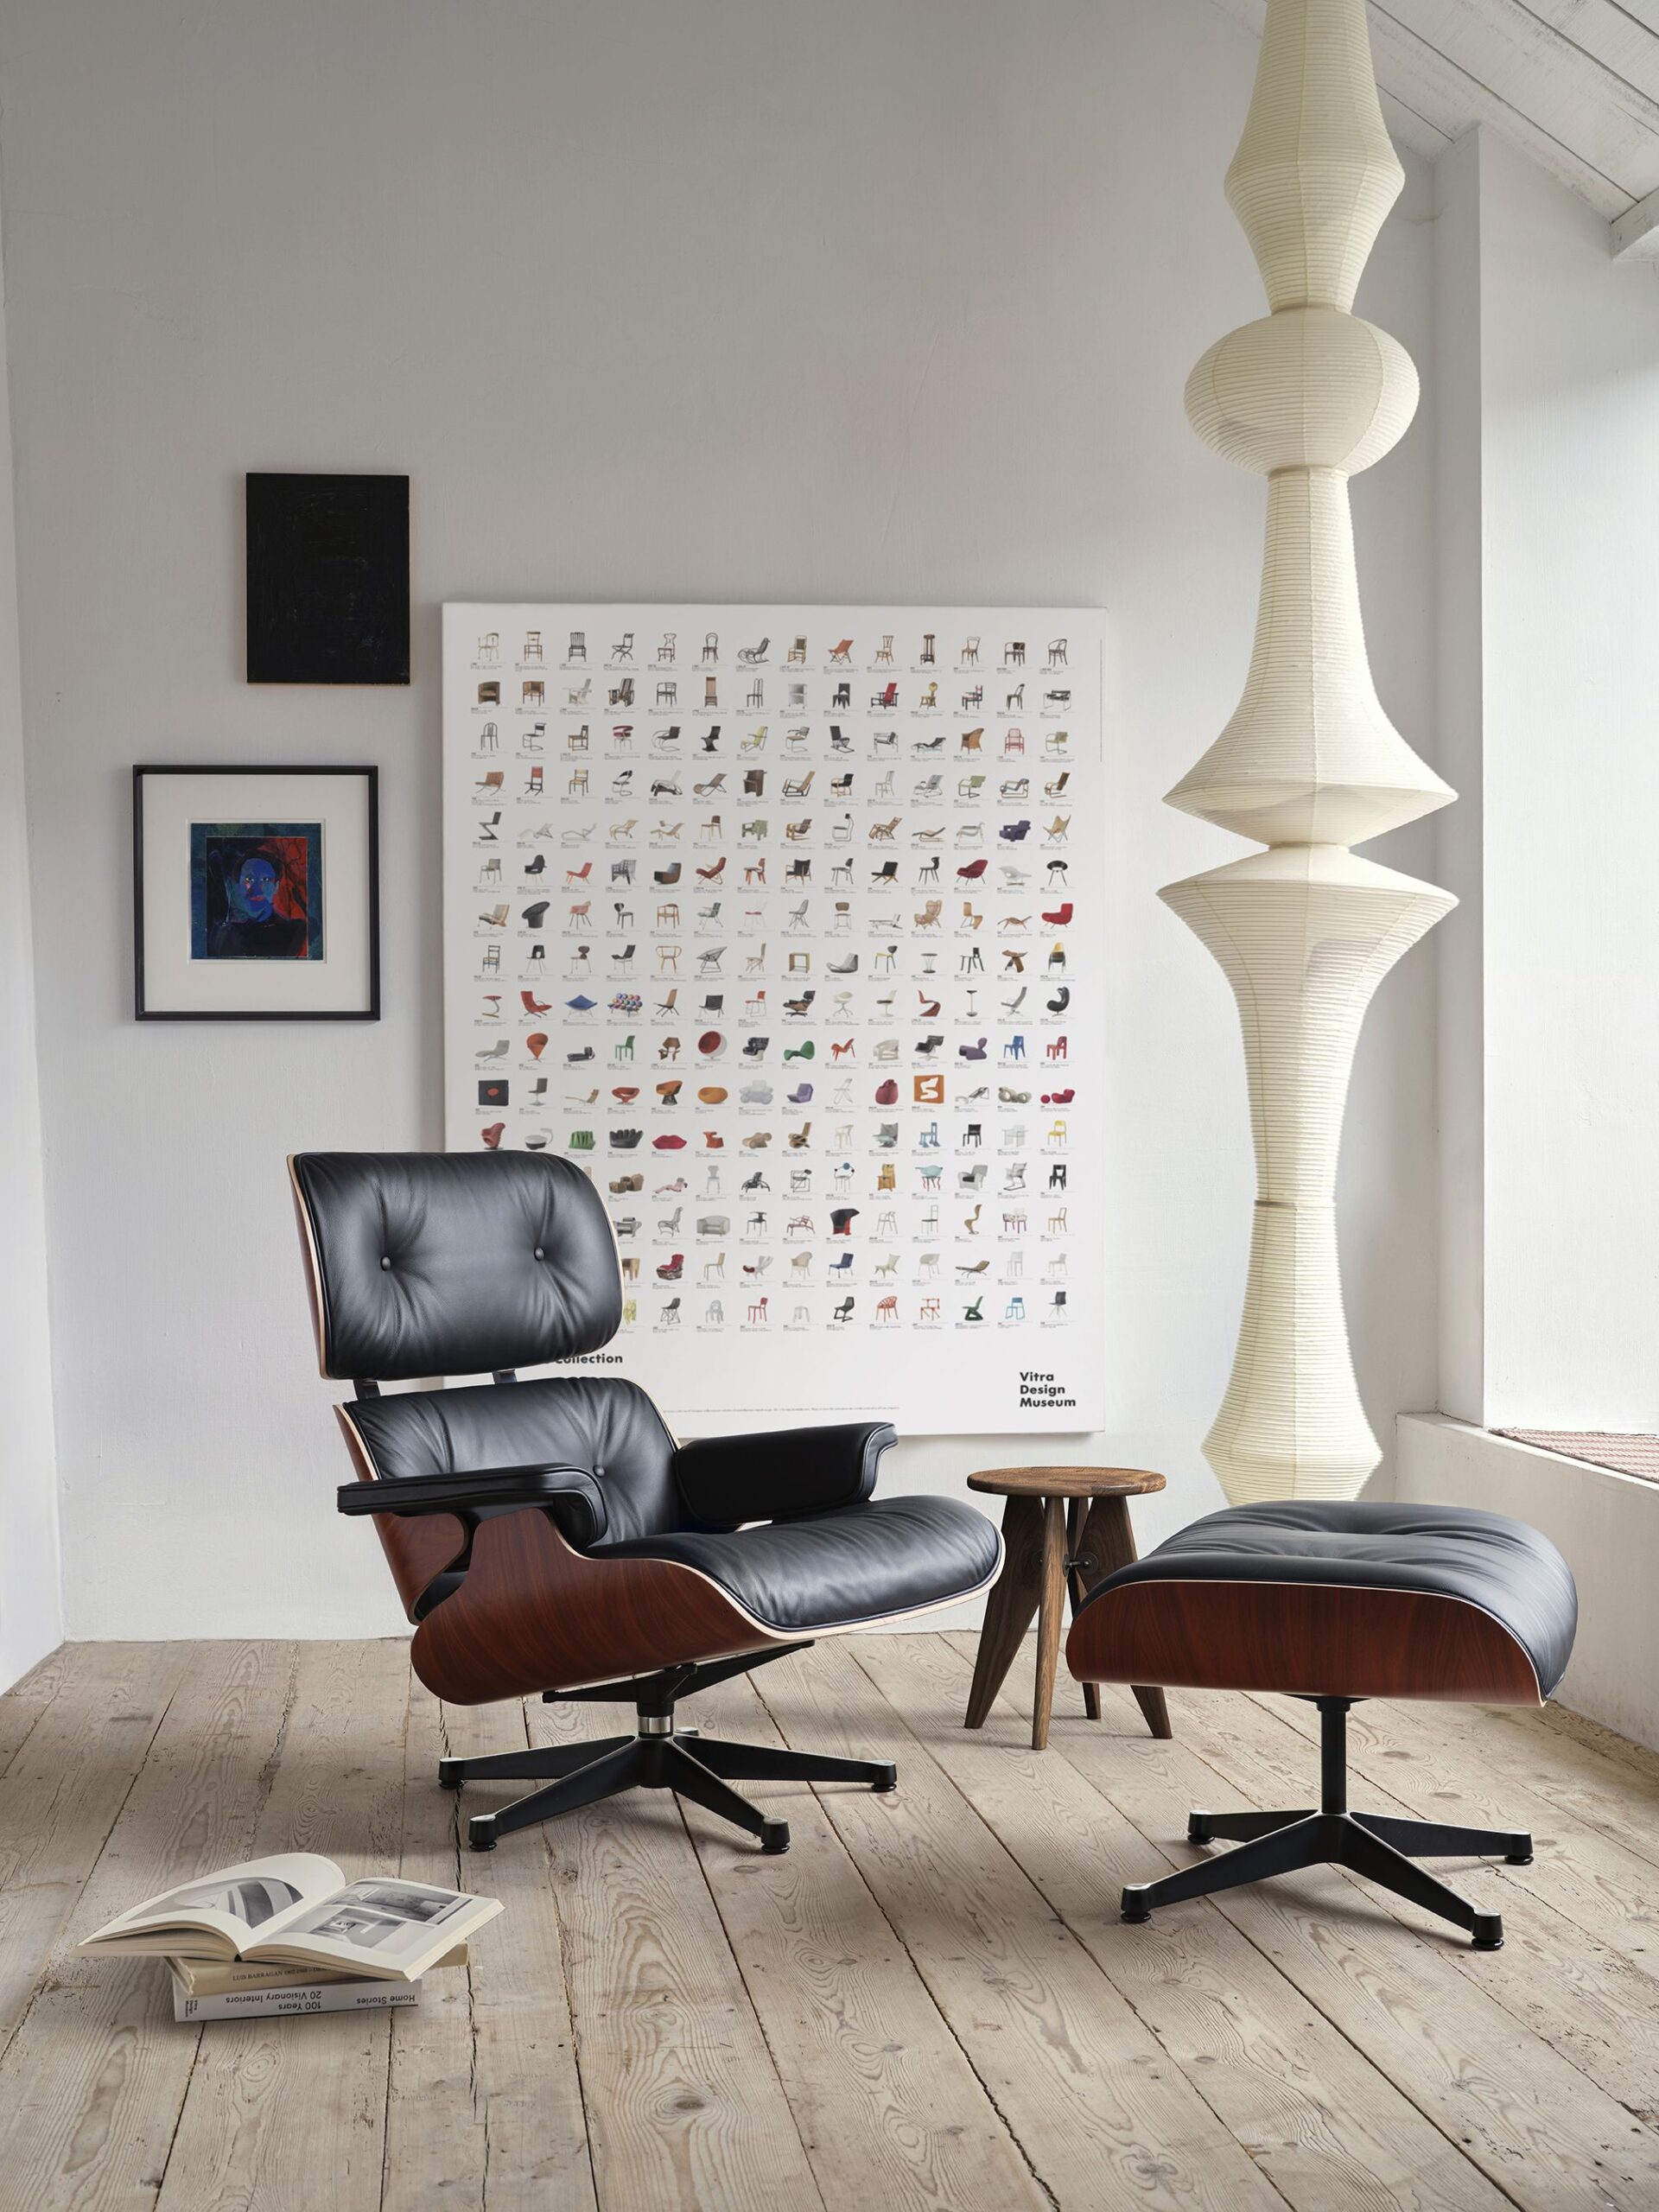 Iconic Design: Add Sophistication with Eames Chairs